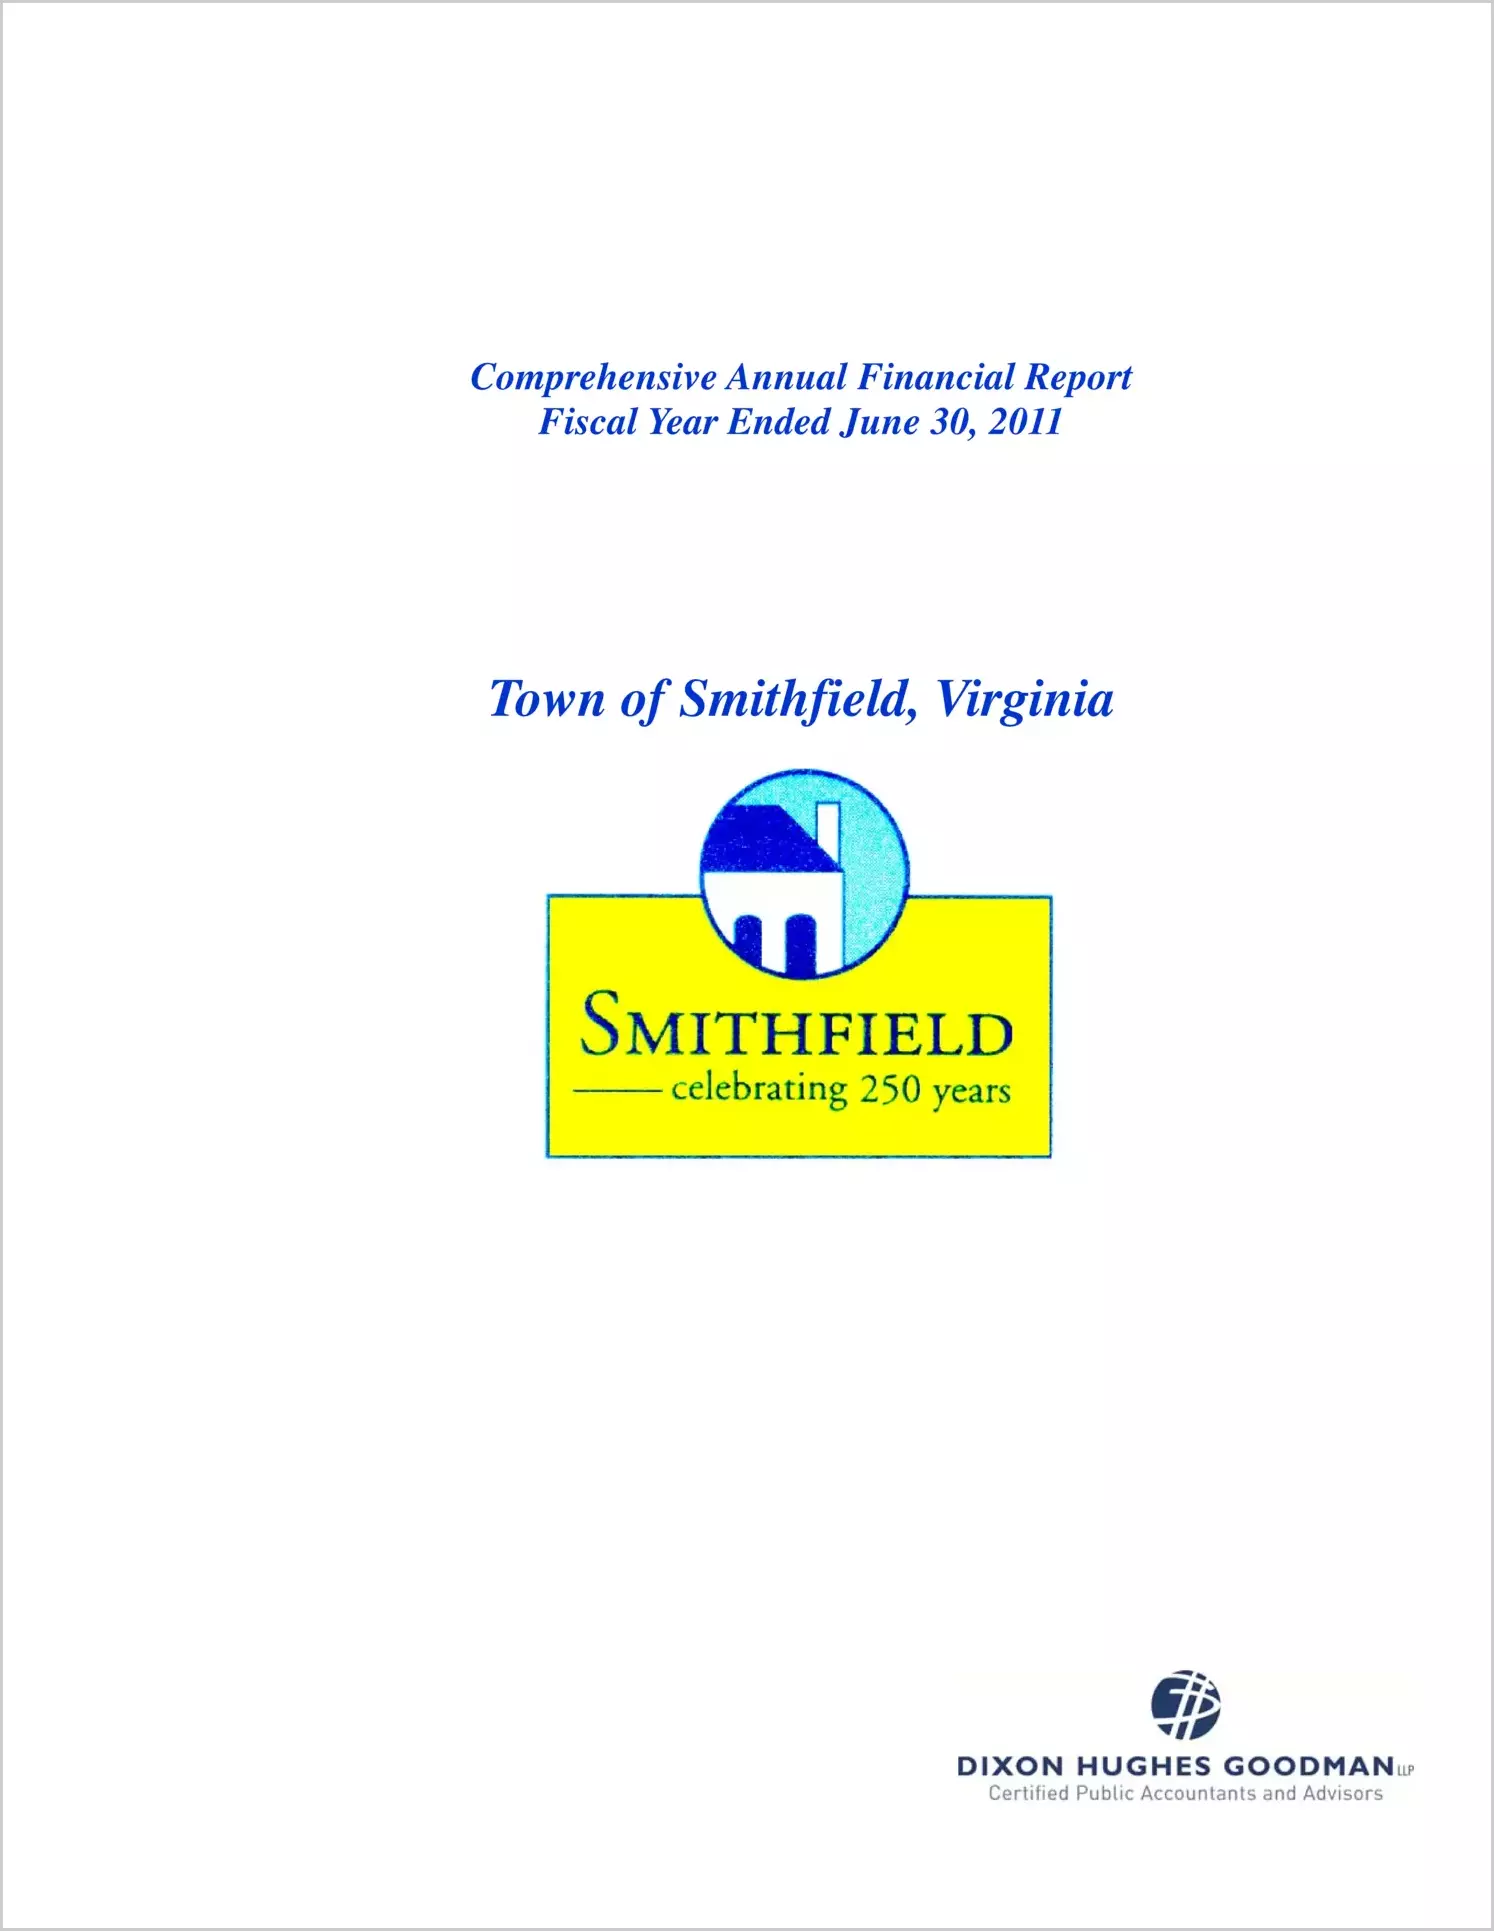 2011 Annual Financial Report for Town of Smithfield